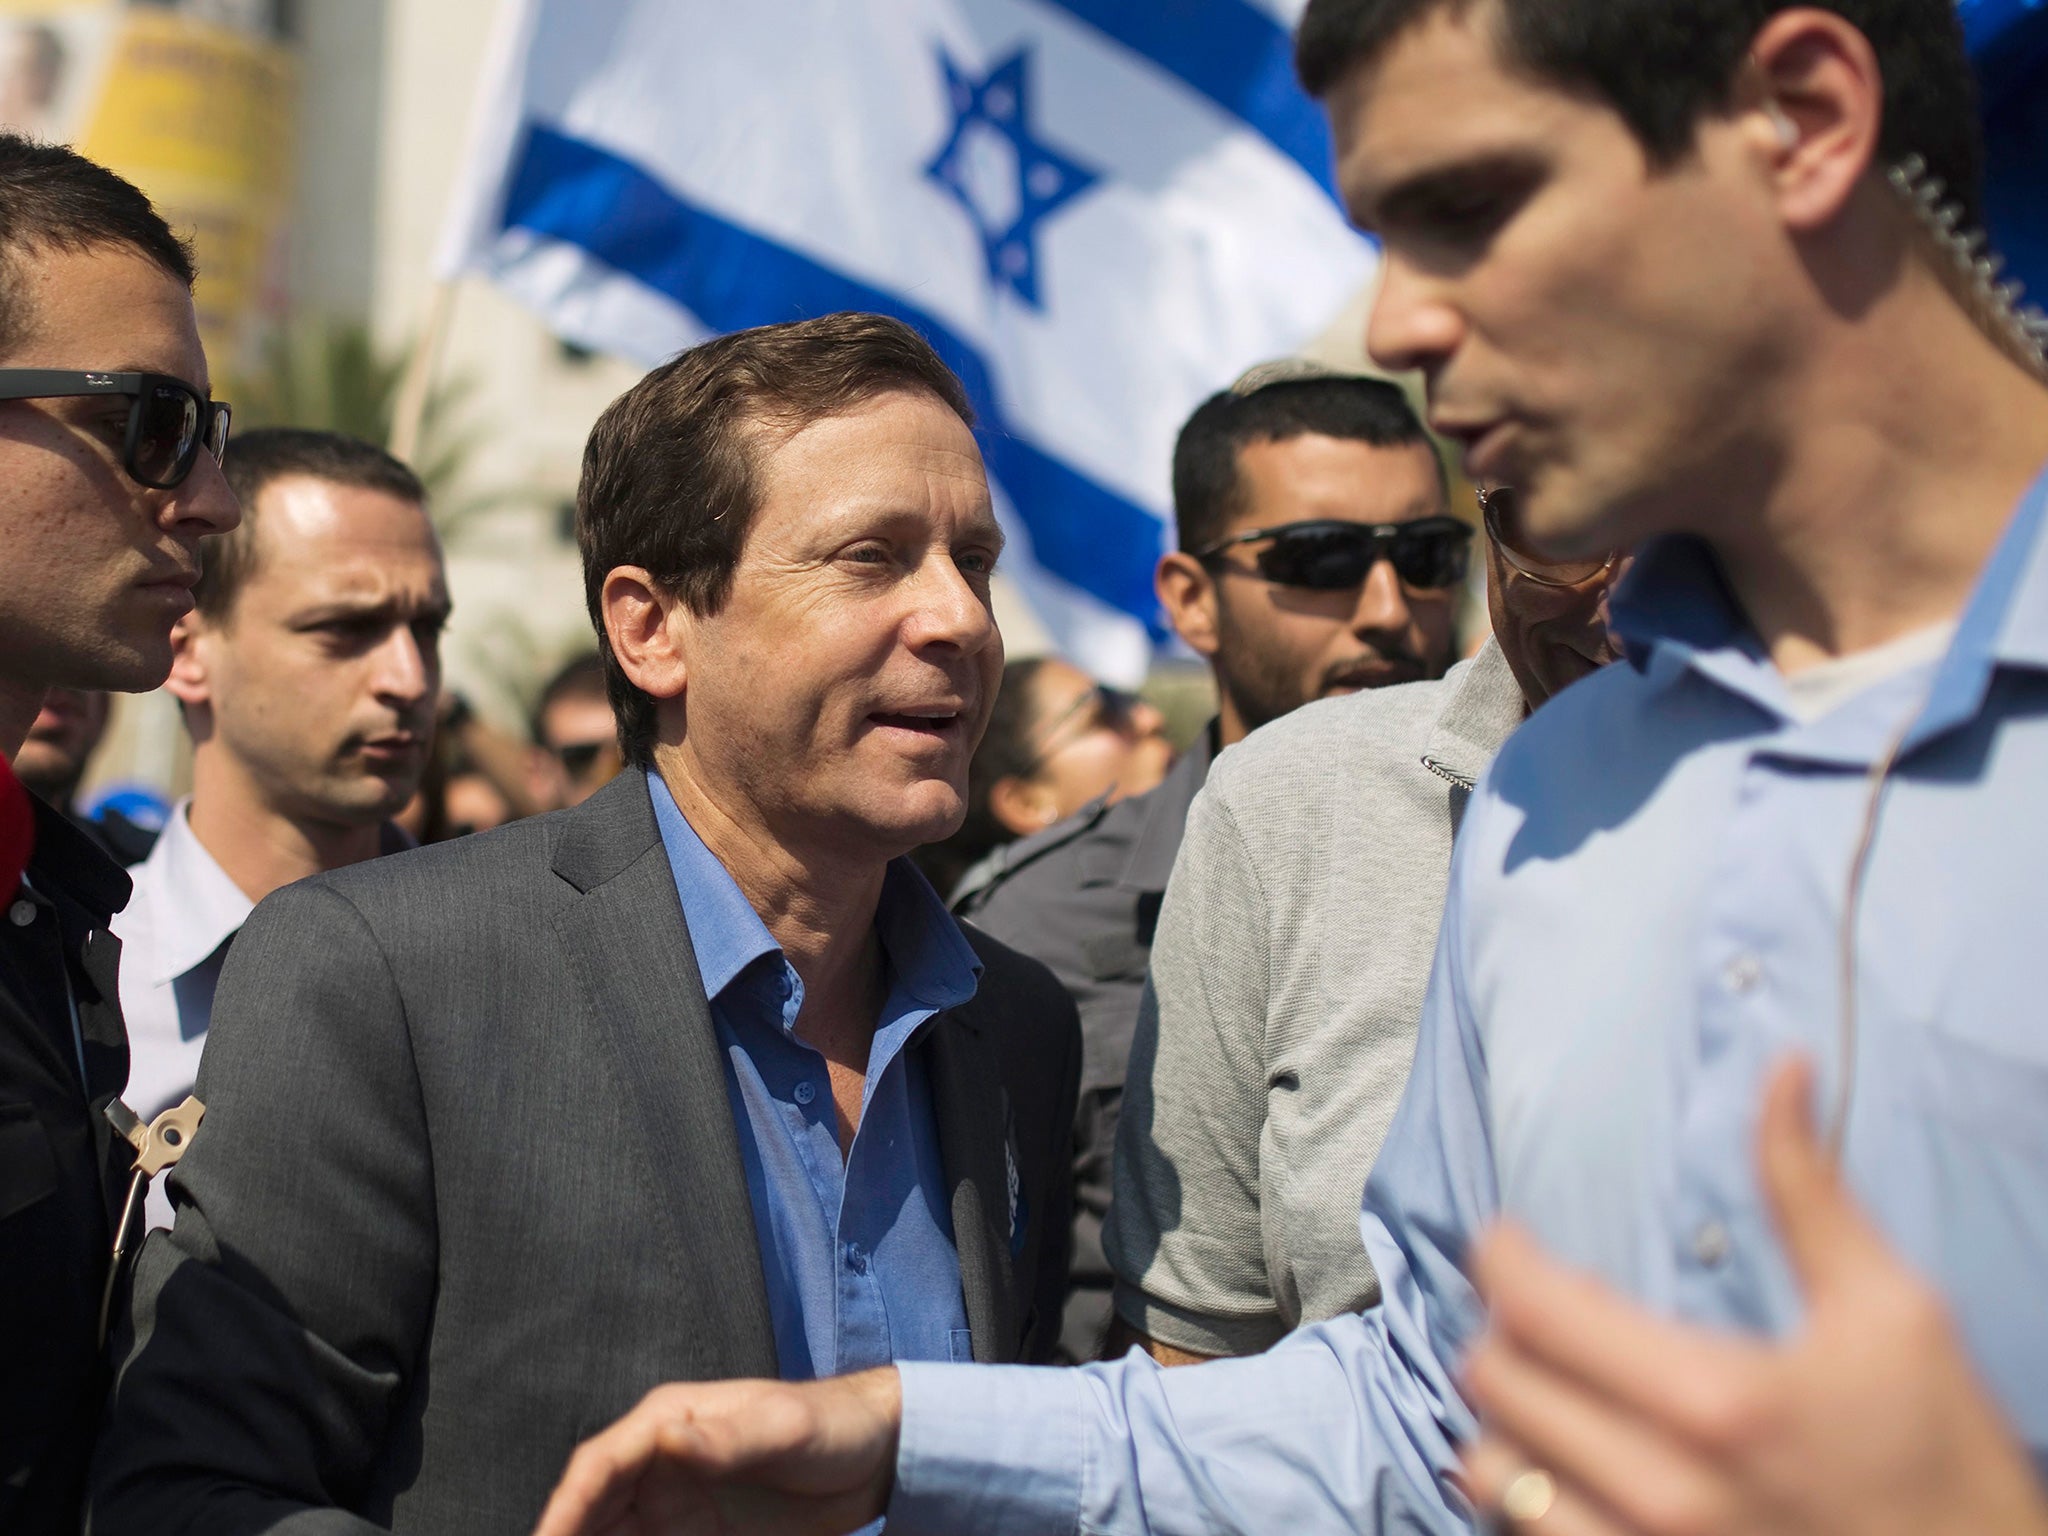 Isaac Herzog, co-leader of the centre-left Zionist Union, campaigns in Ashdod